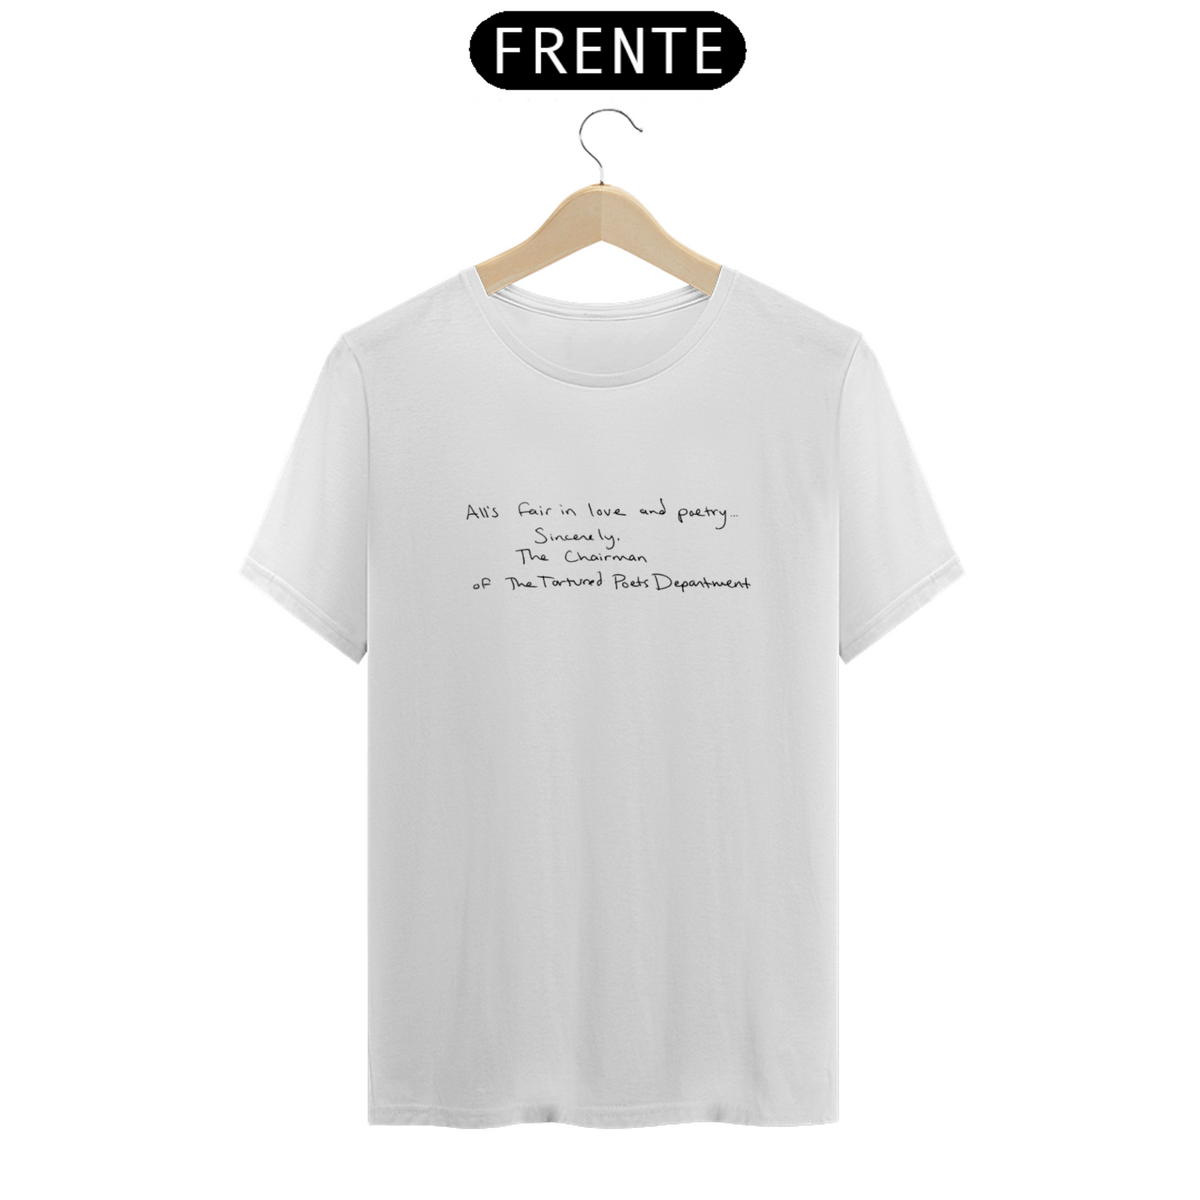 Nome do produto: Camiseta The chairman of the tortured poets department - Taylor Swift